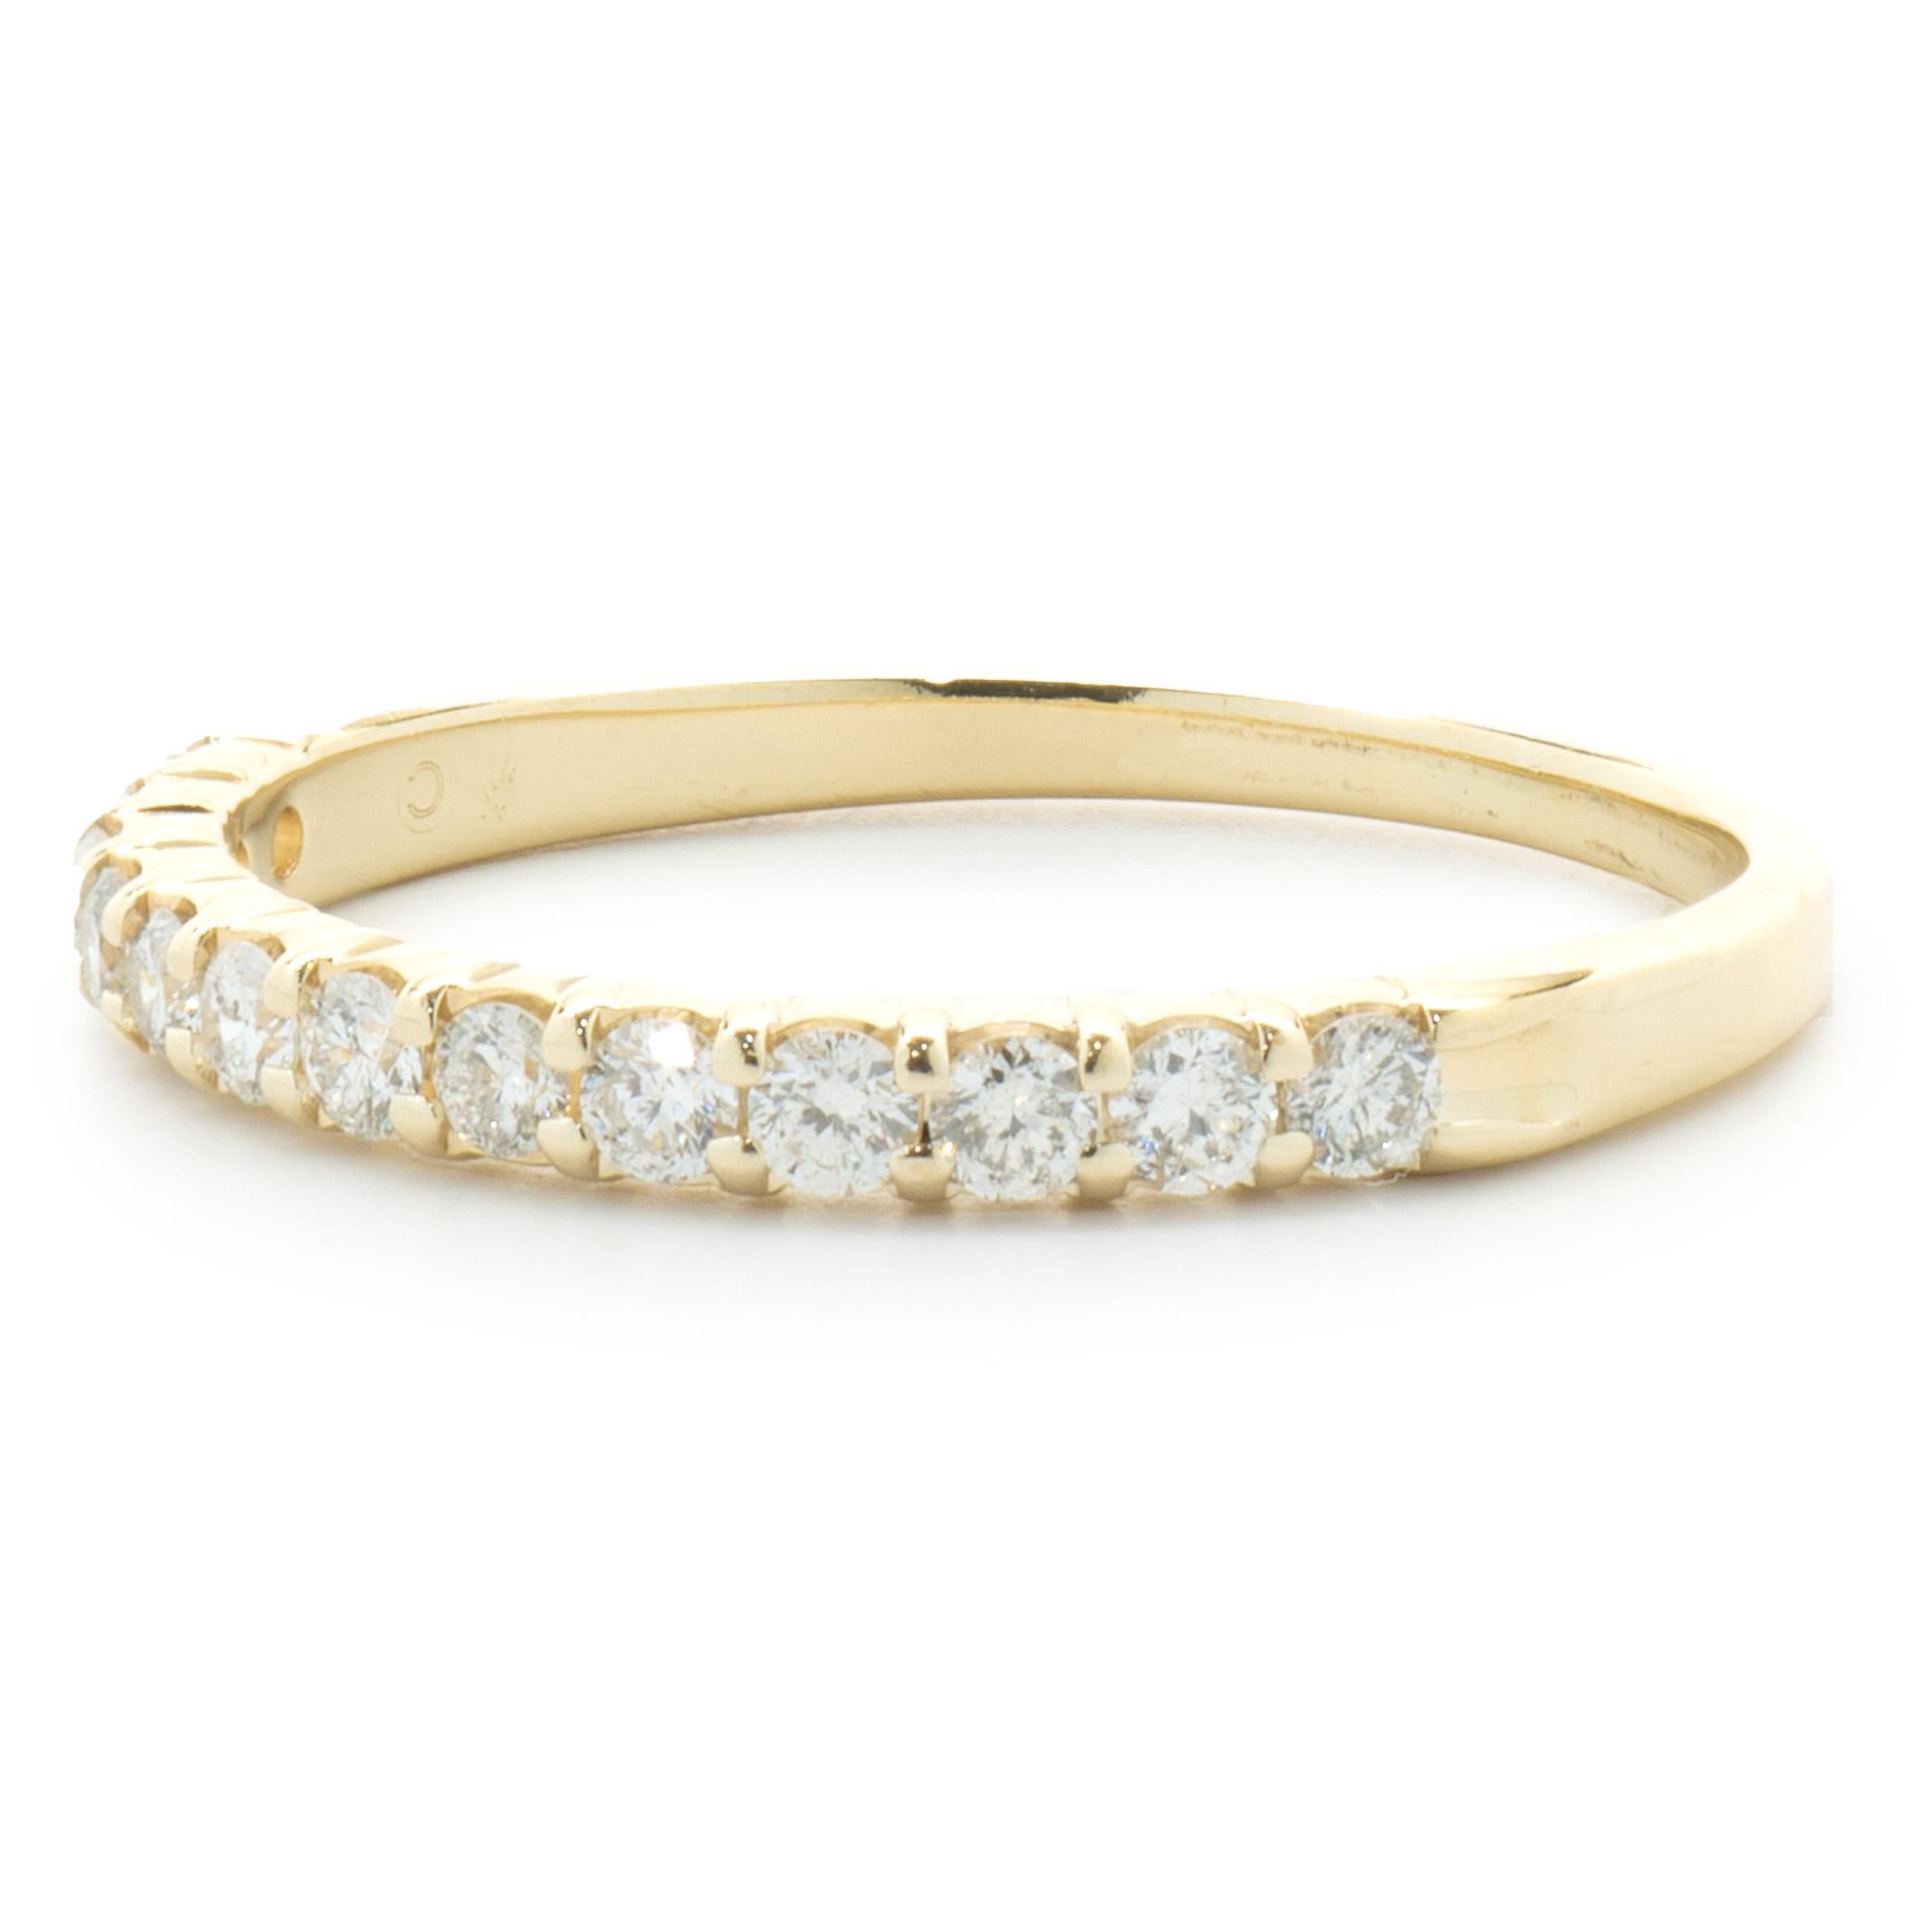 Designer: custom
Material: 14K yellow gold
Diamonds: 13 round brilliant cut = 0.26cttw
Color: H
Clarity: SI1
Size: 5 (please allow two additional shipping days for sizing requests)  
Dimensions: ring measures 2mm in width
Weight: 1.27 grams
